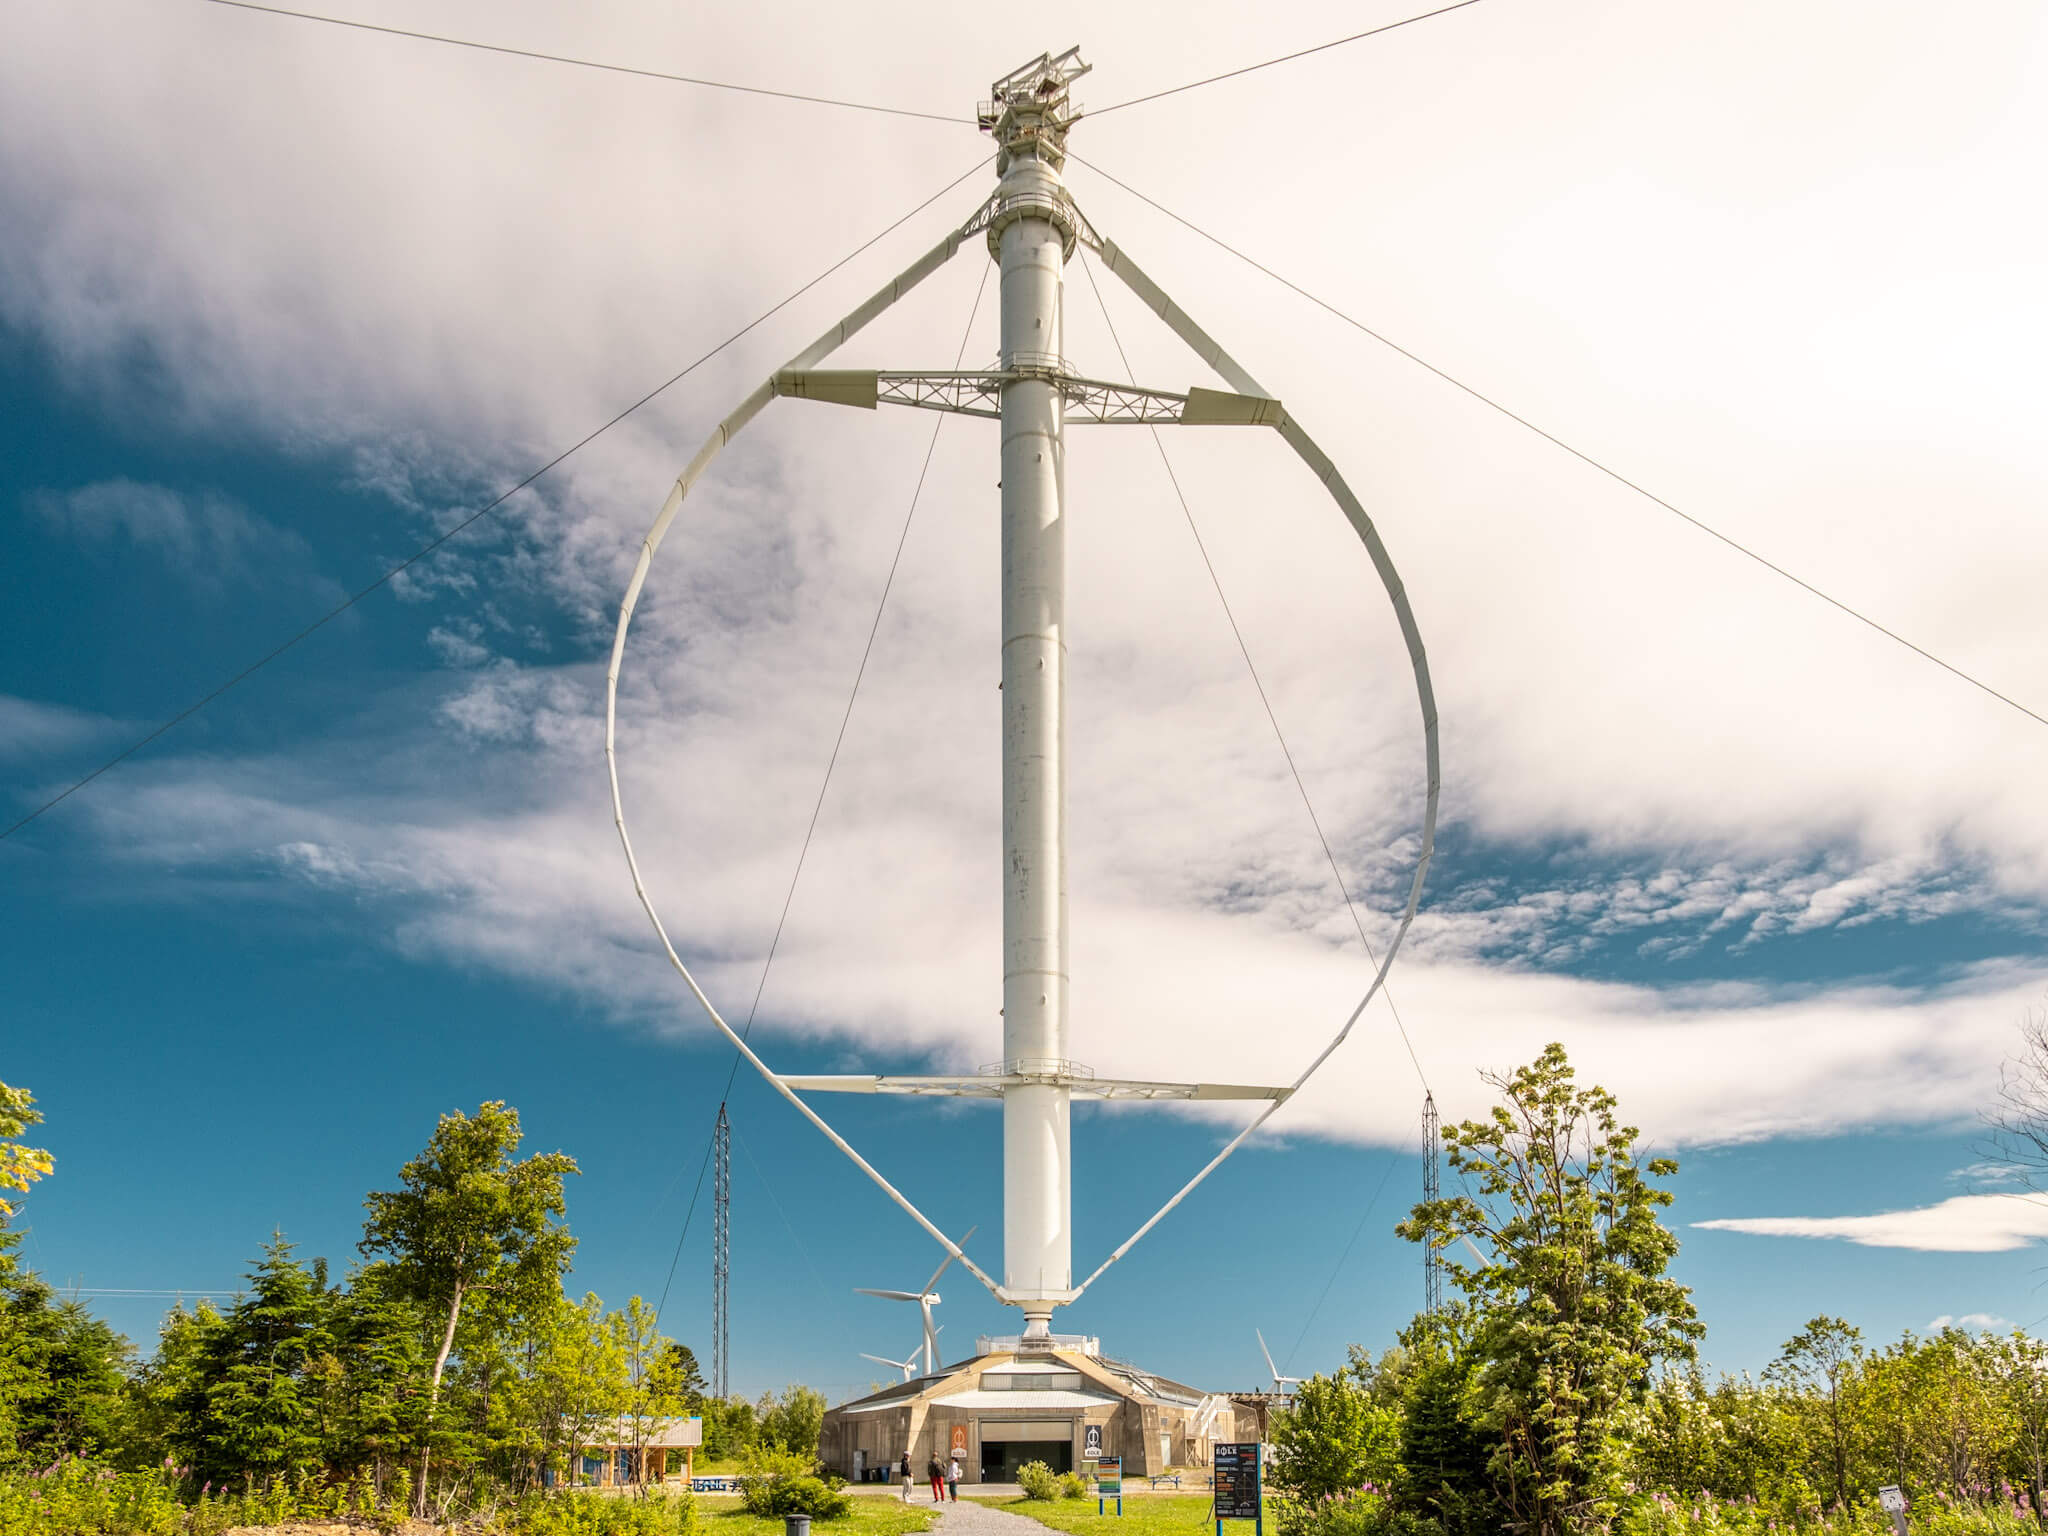 The world’s tallest vertical axis wind turbine in Cap-Chat, Quebec